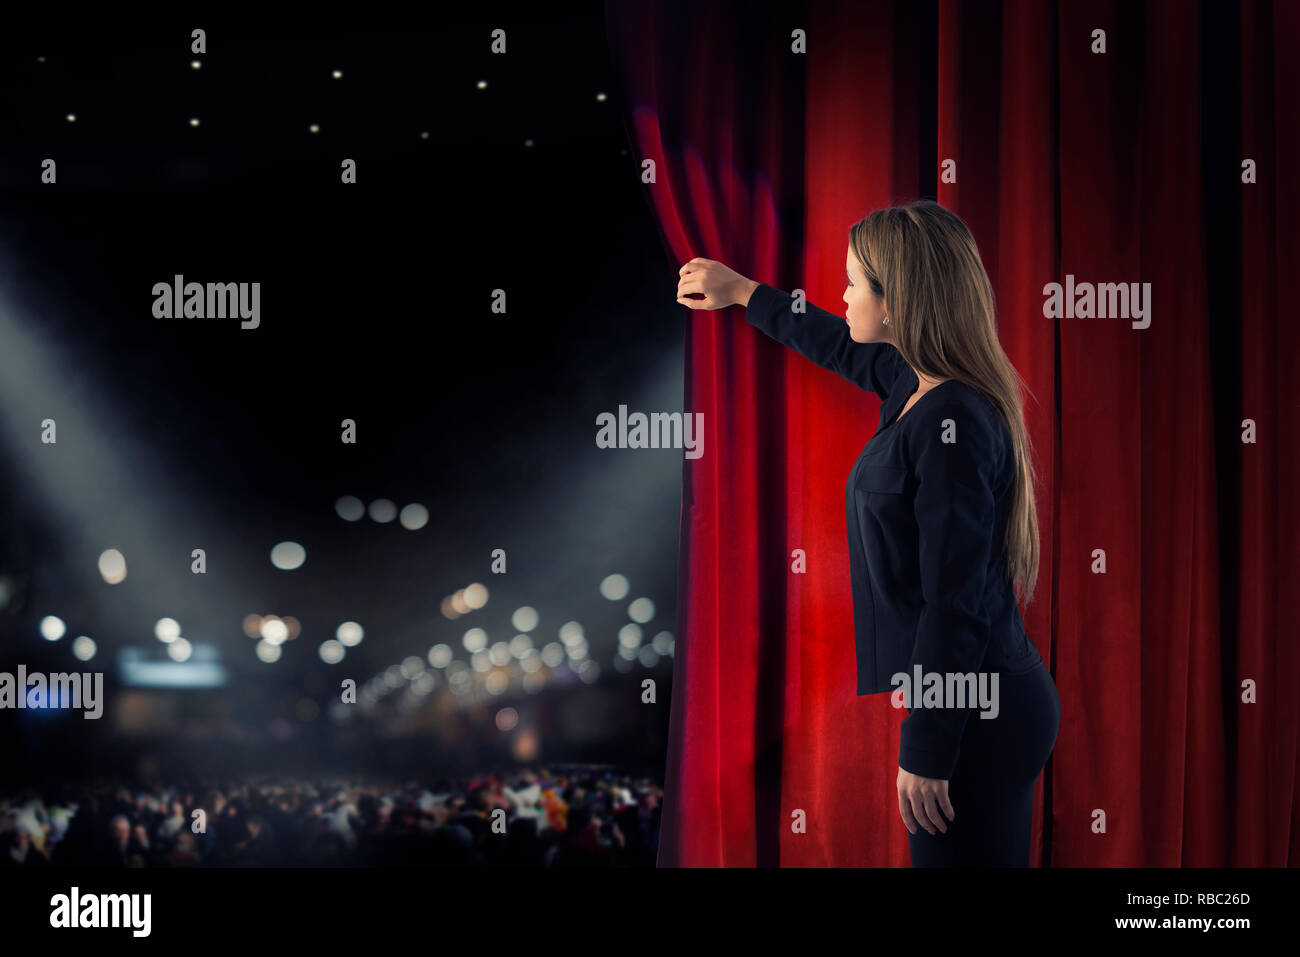 Woman open red curtains of the theater stage Stock Photo